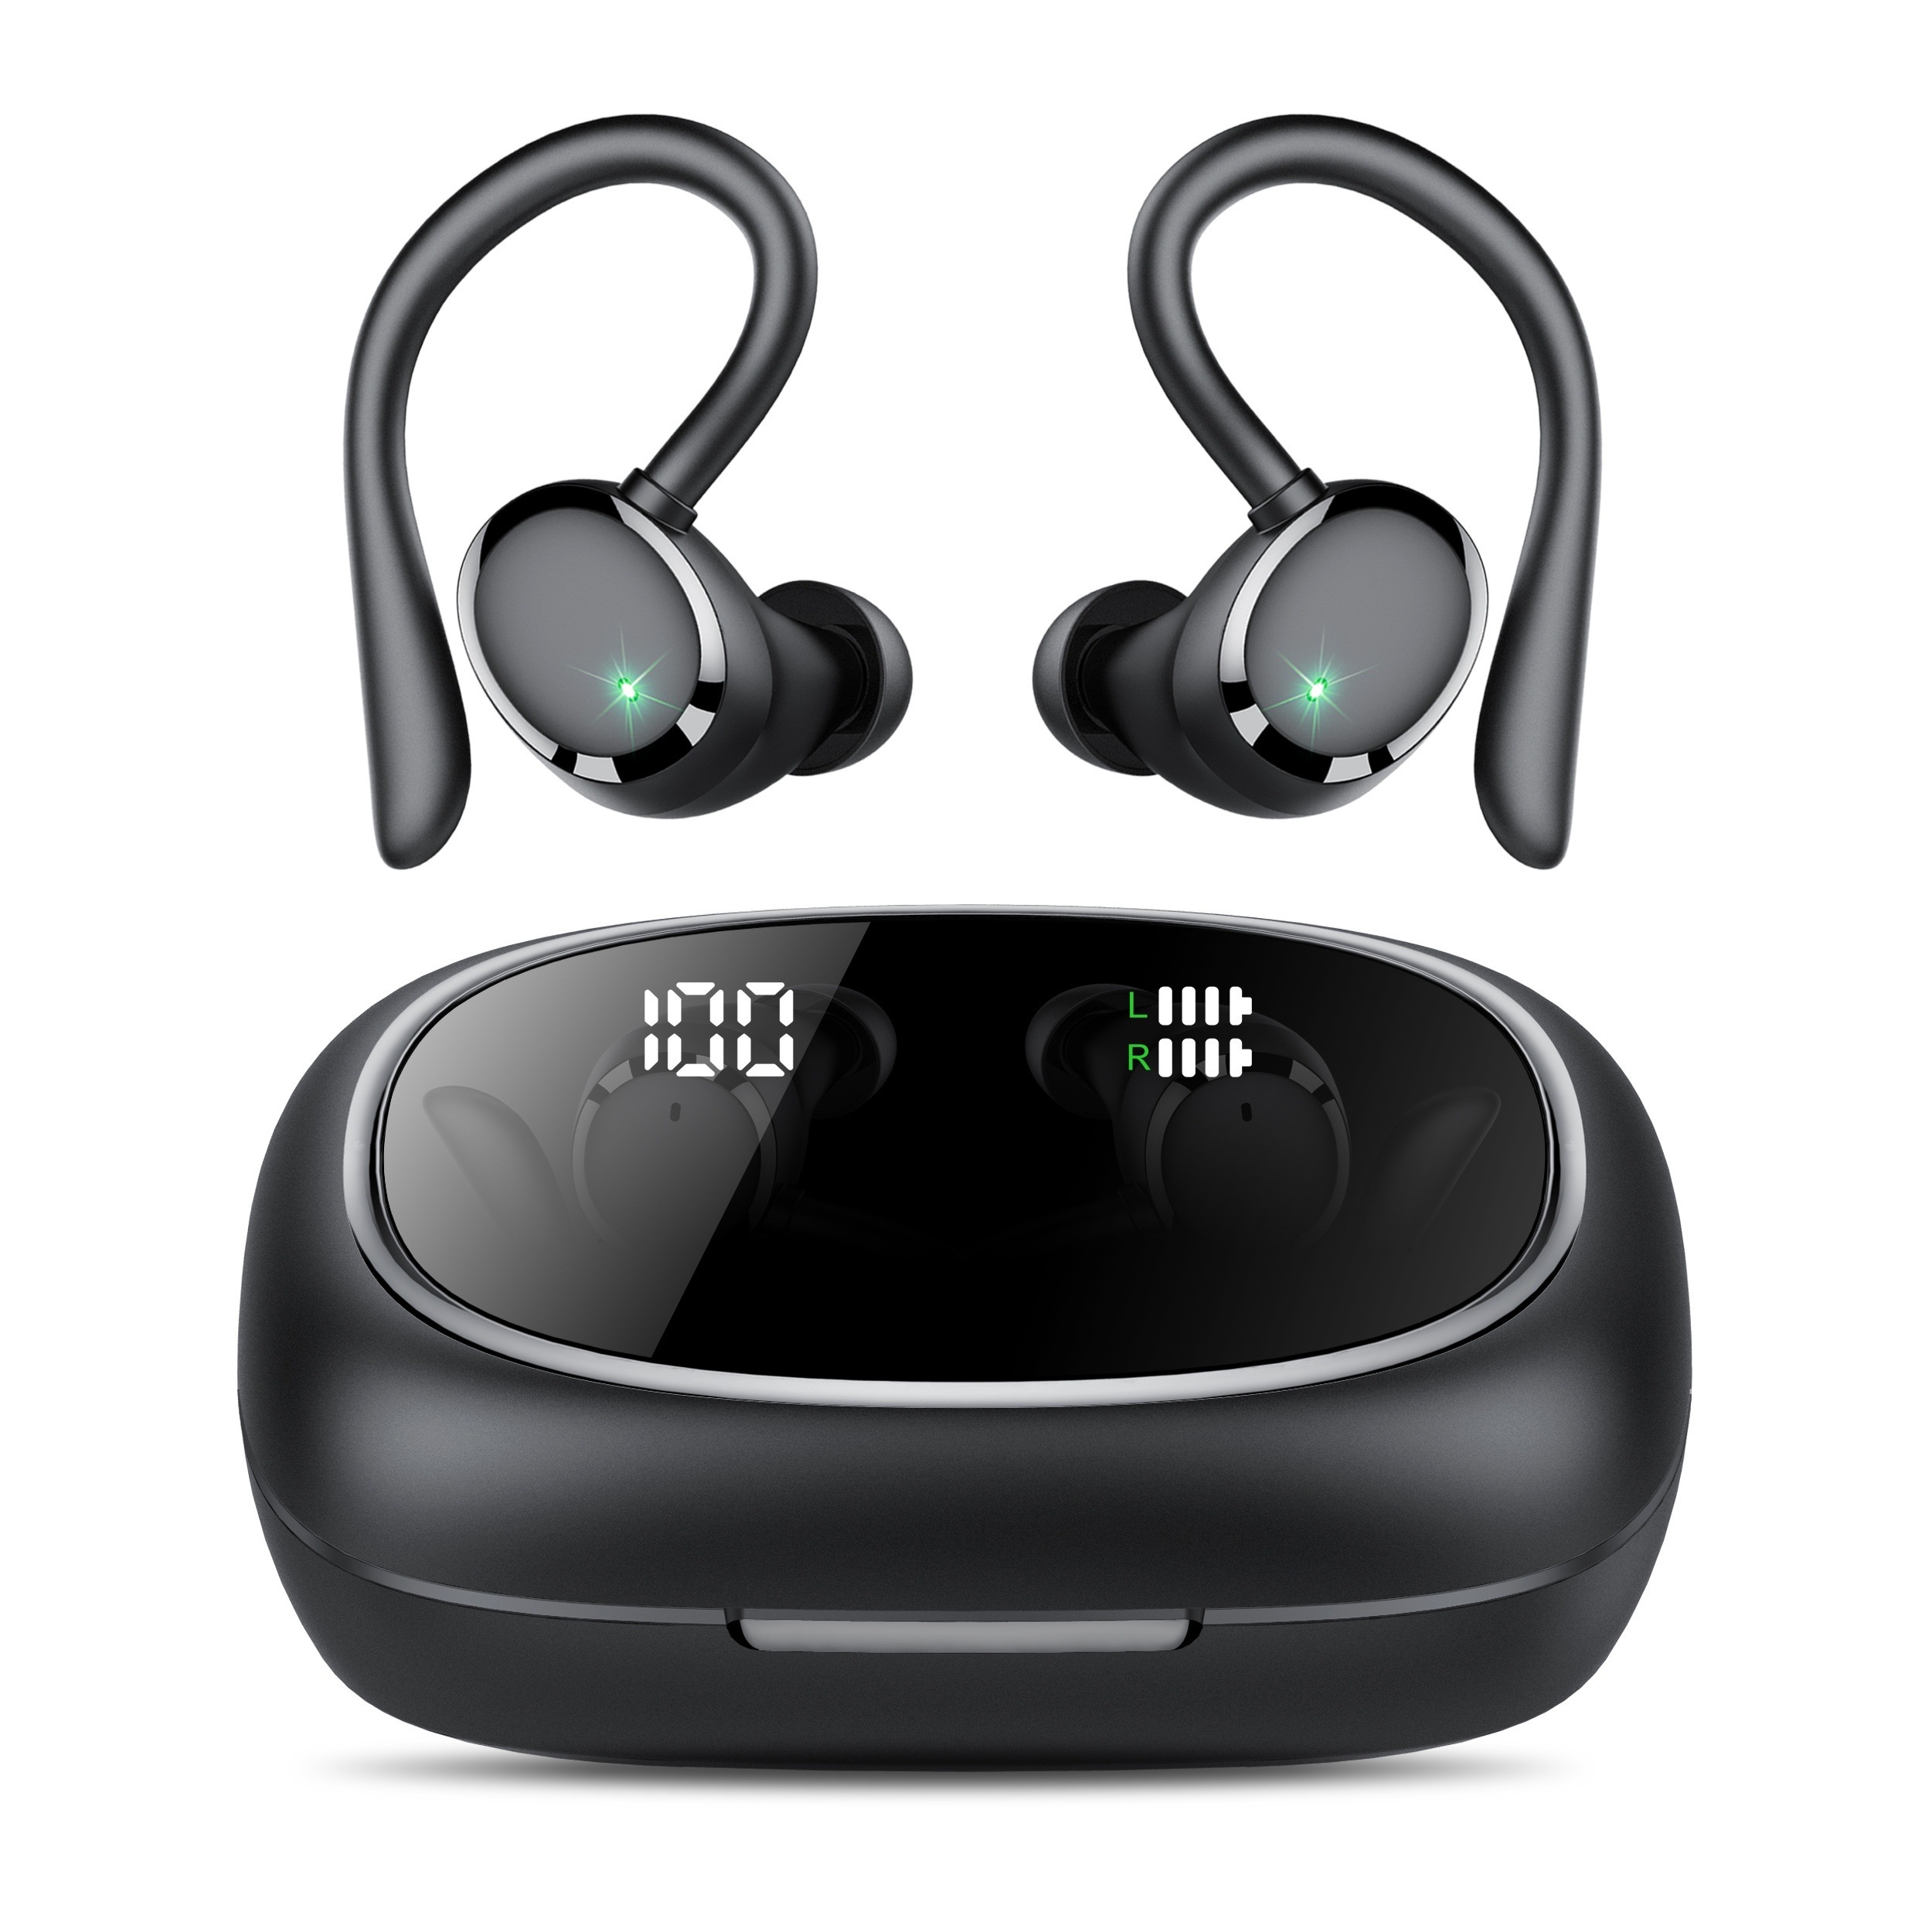 

Ikt A12 New Wireless Earphones For Running Sports, Wireless Earbuds Playback Hd Stereo Audio Led Display, Over-ear Headphones Earphones With Earhooks, Enc Headset Built-in Mic, For Iphone & Android